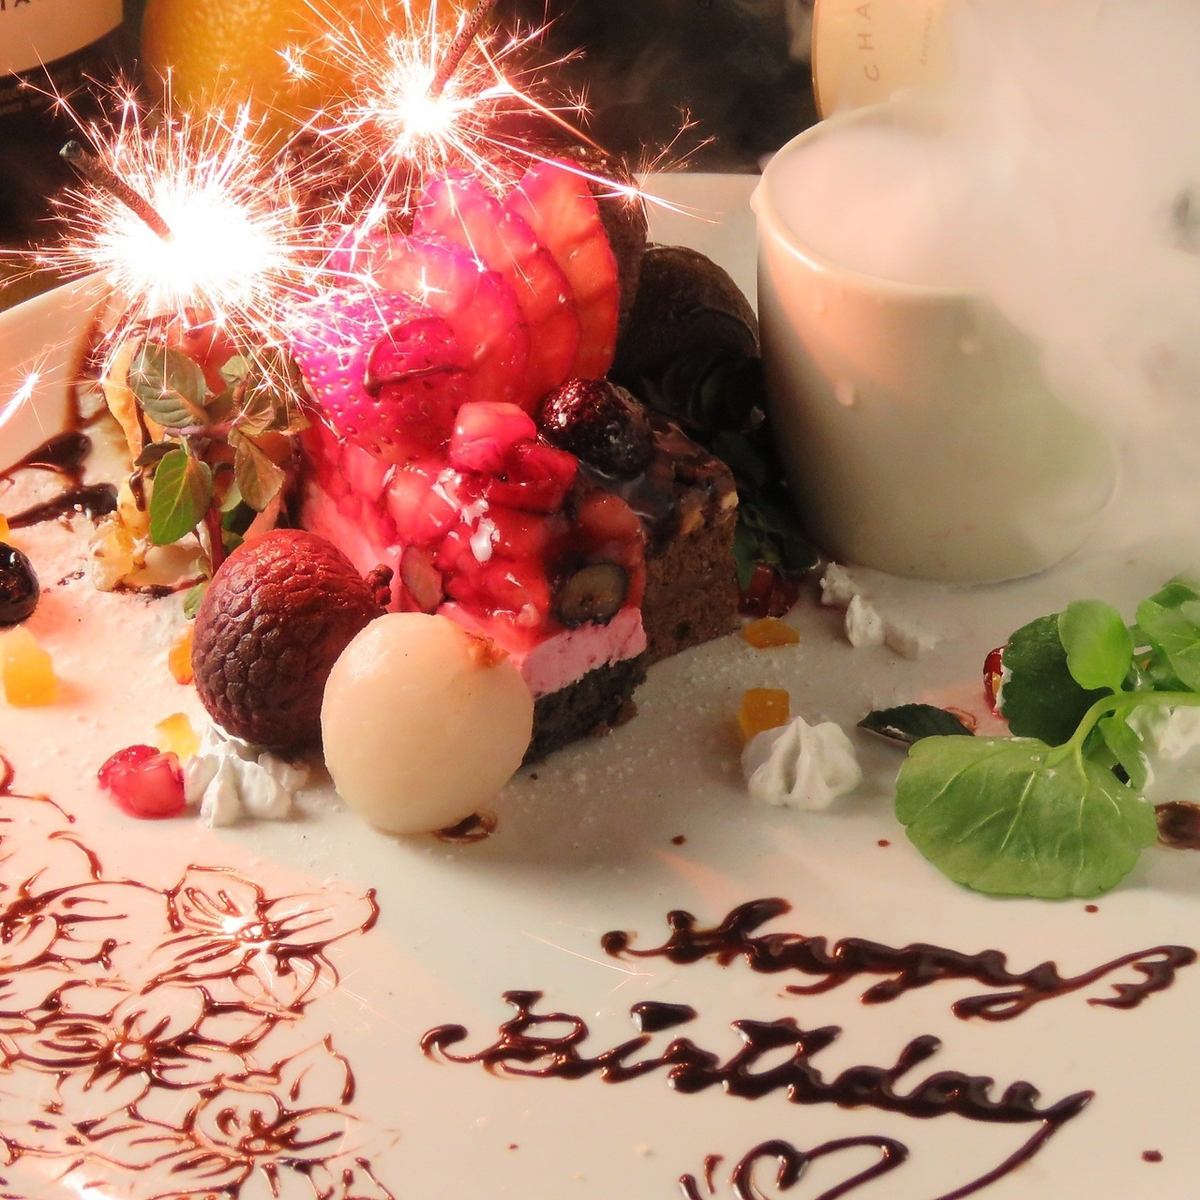 ★A surprise dessert plate will be given to you on your anniversary or birthday★